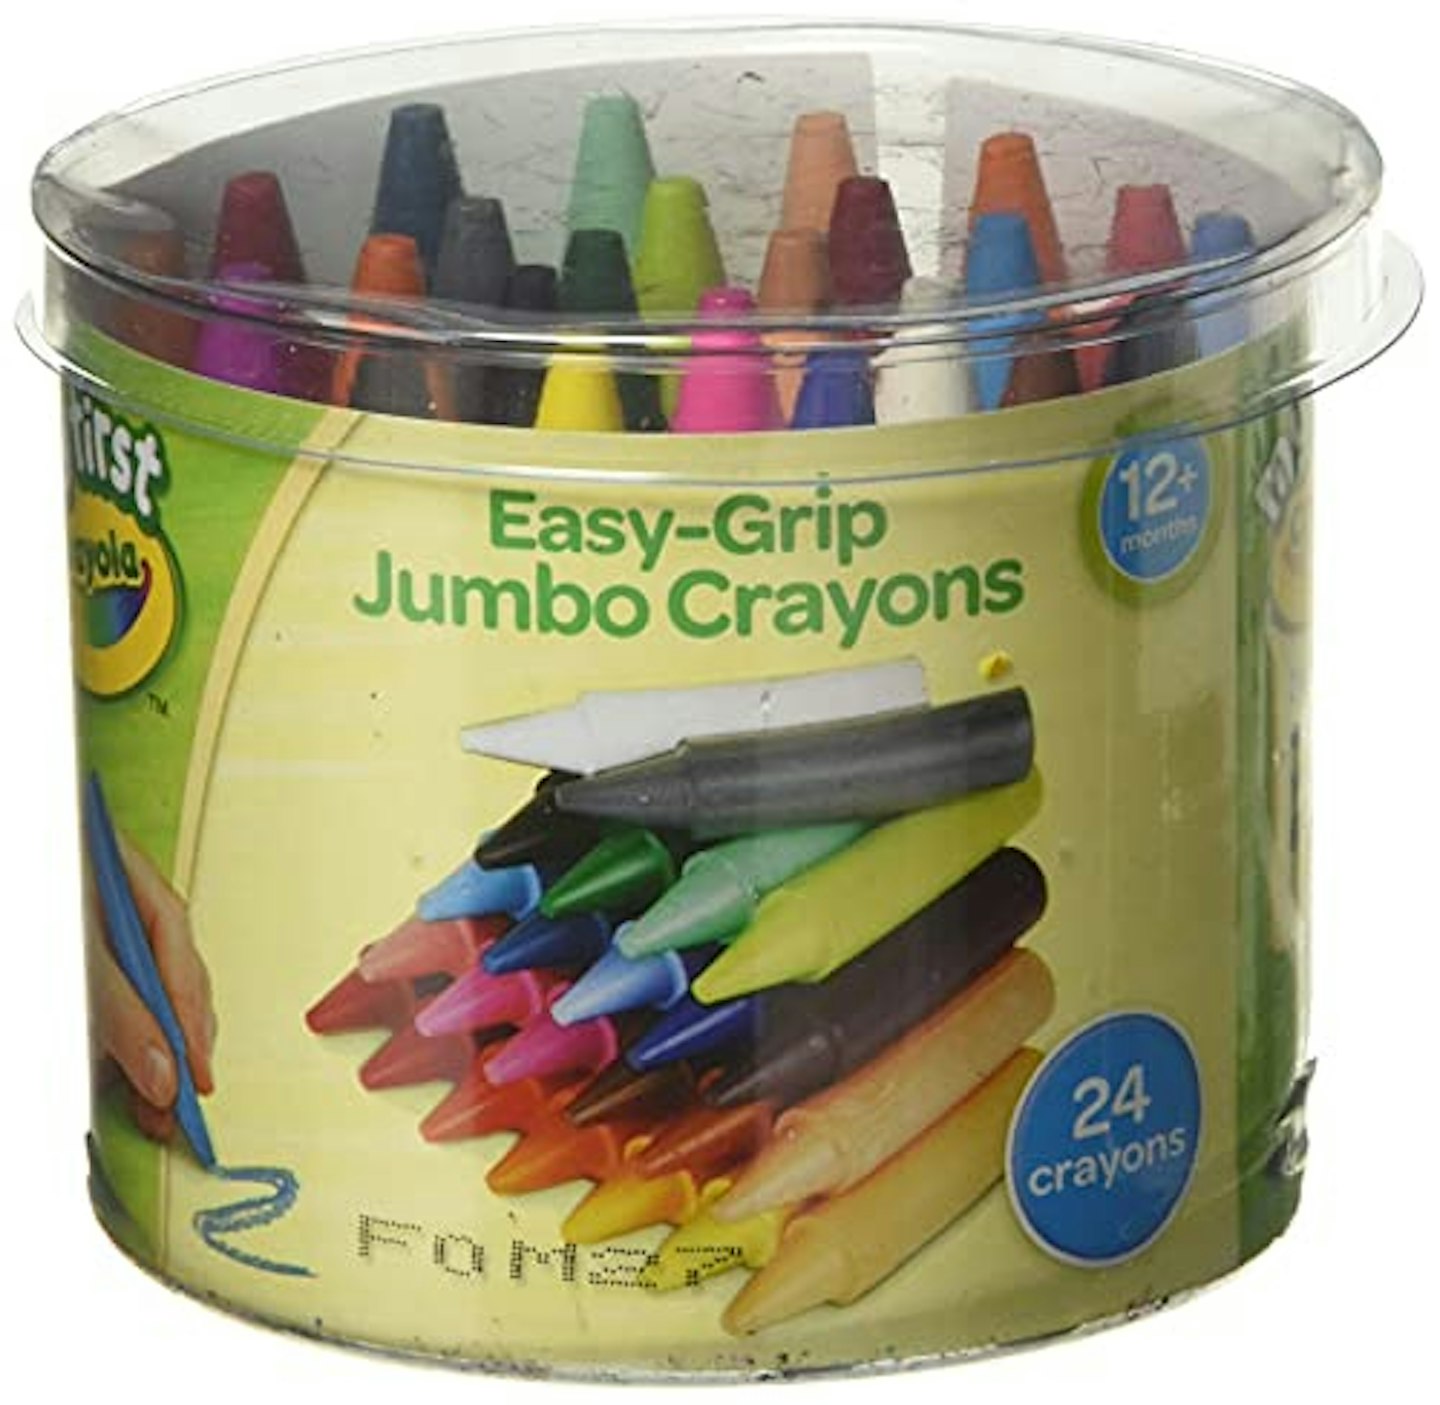 Best Non-Toxic Crayons for Toddler Guide [UPDATED 2020]